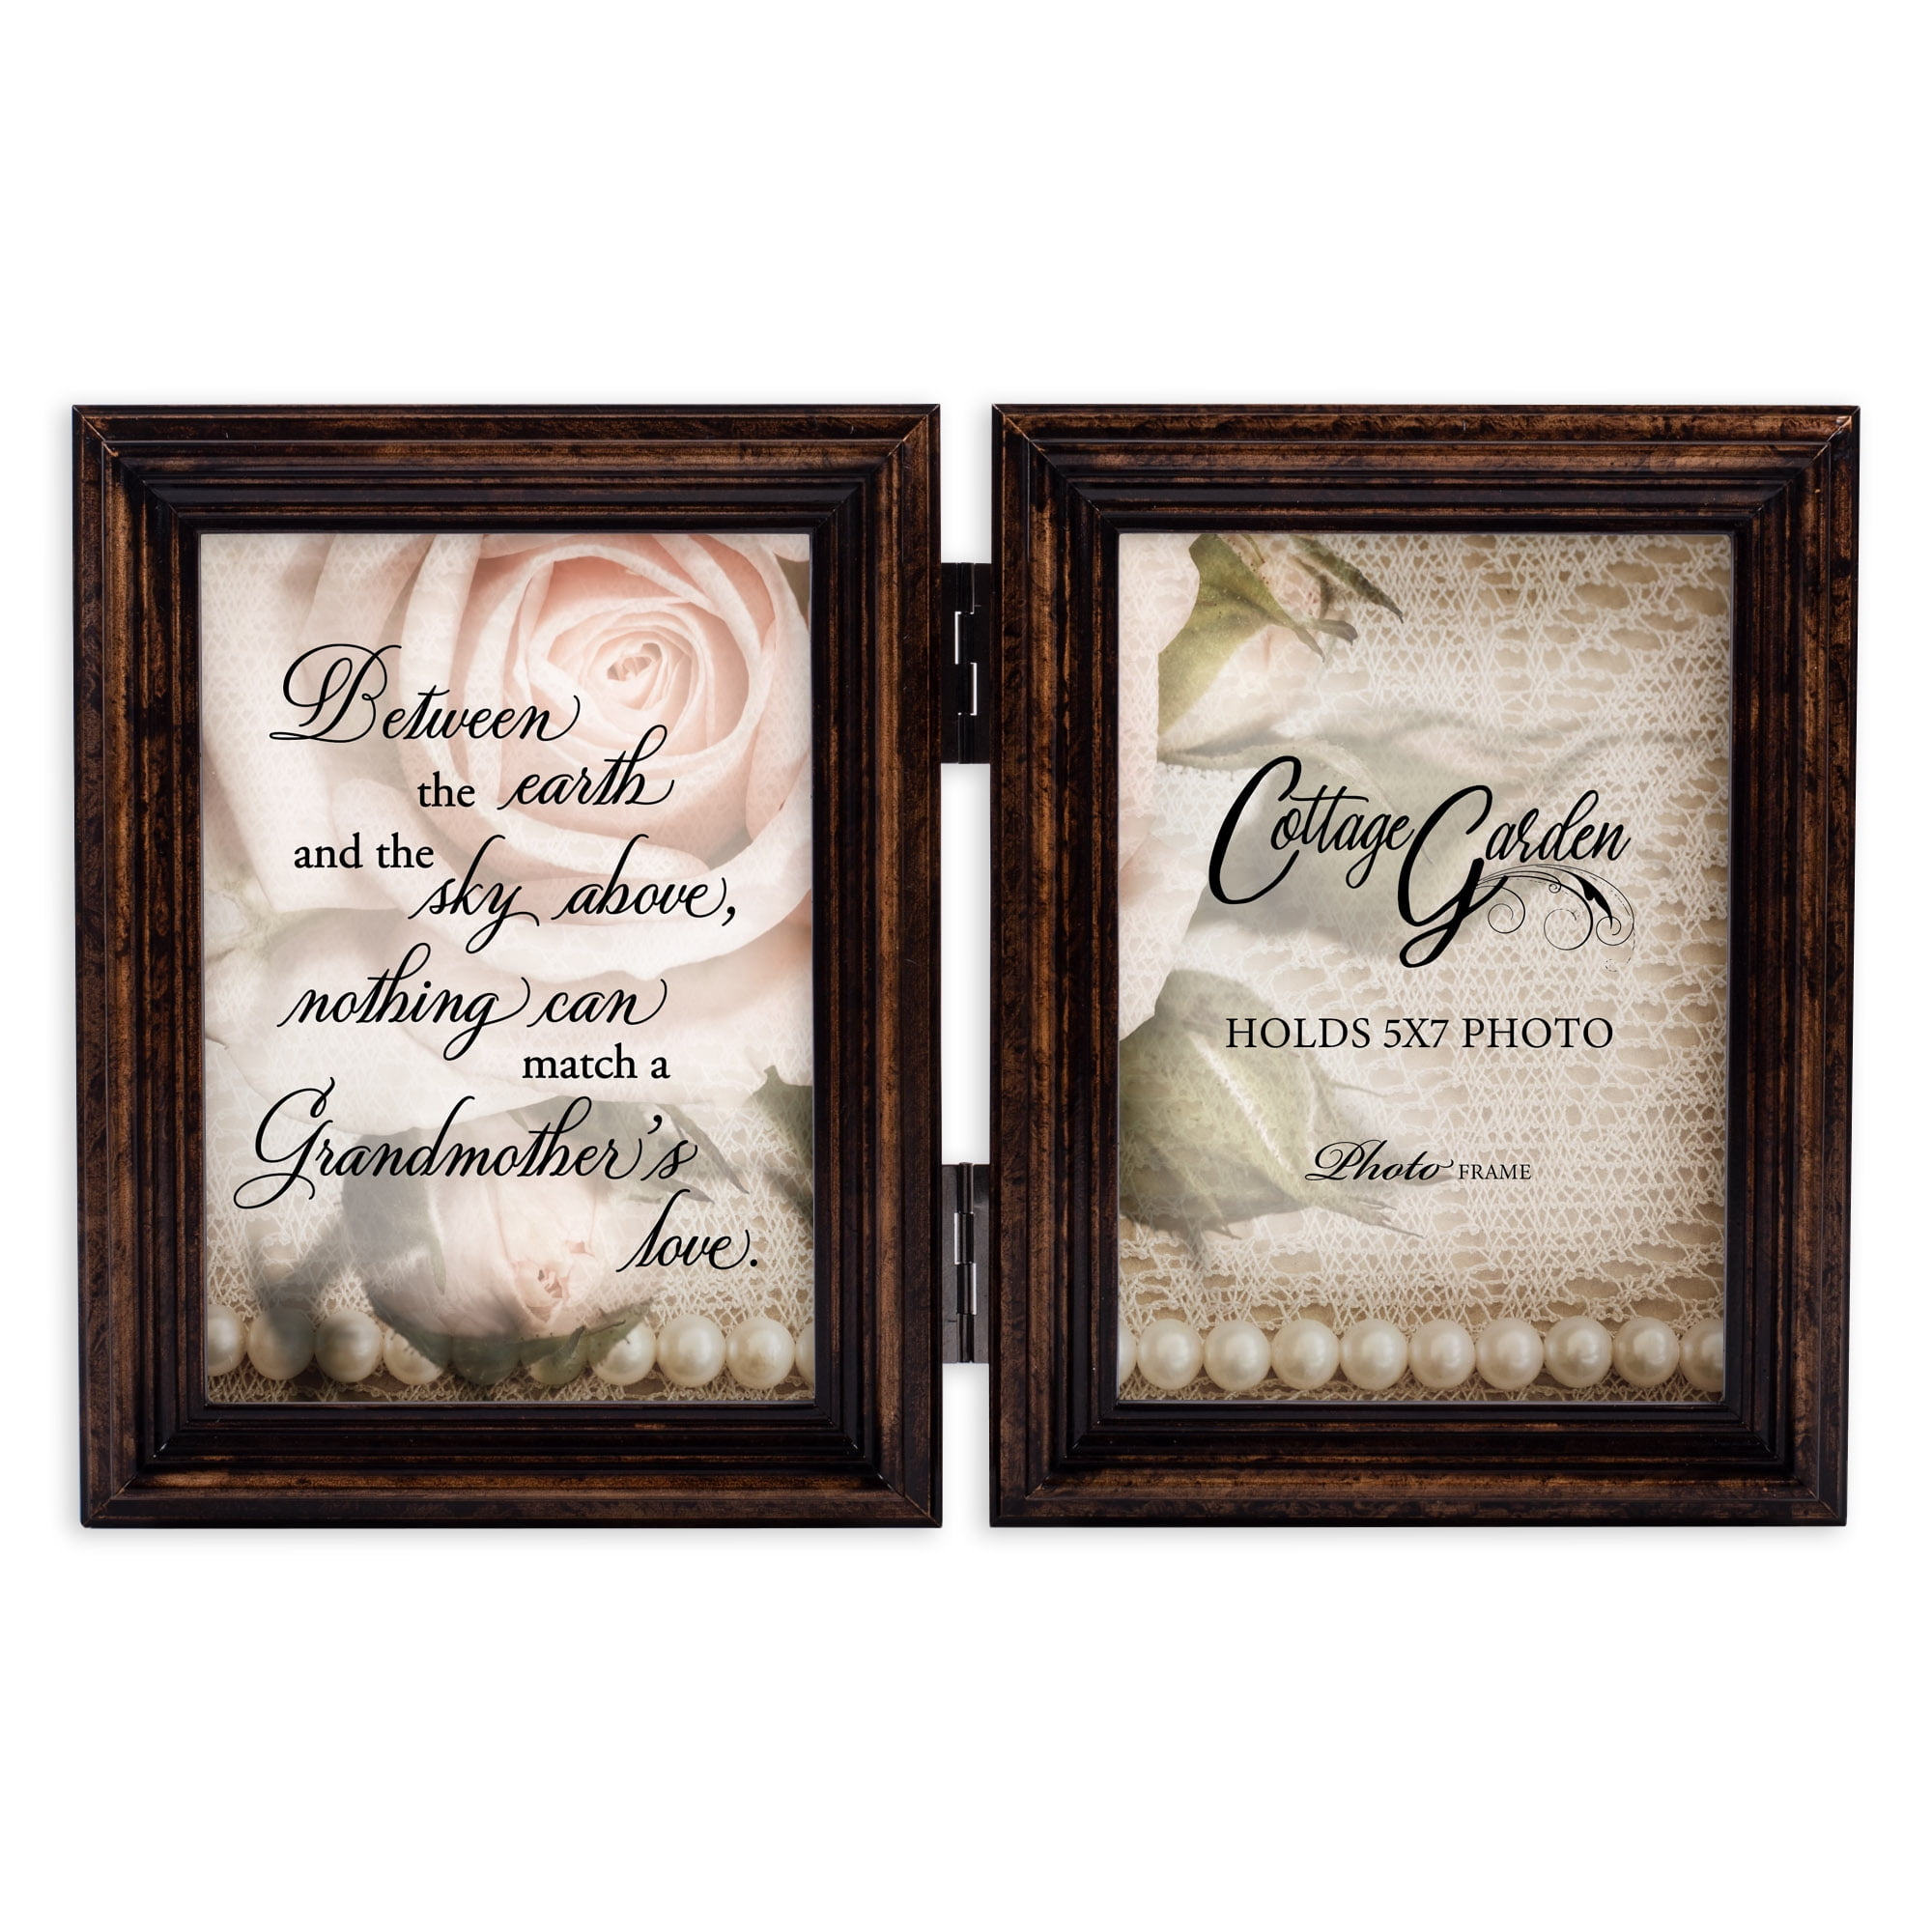 Earth Sky Match Love Amber Wood Double Tabletop Photo Frame Holds Two 5x7 Photos